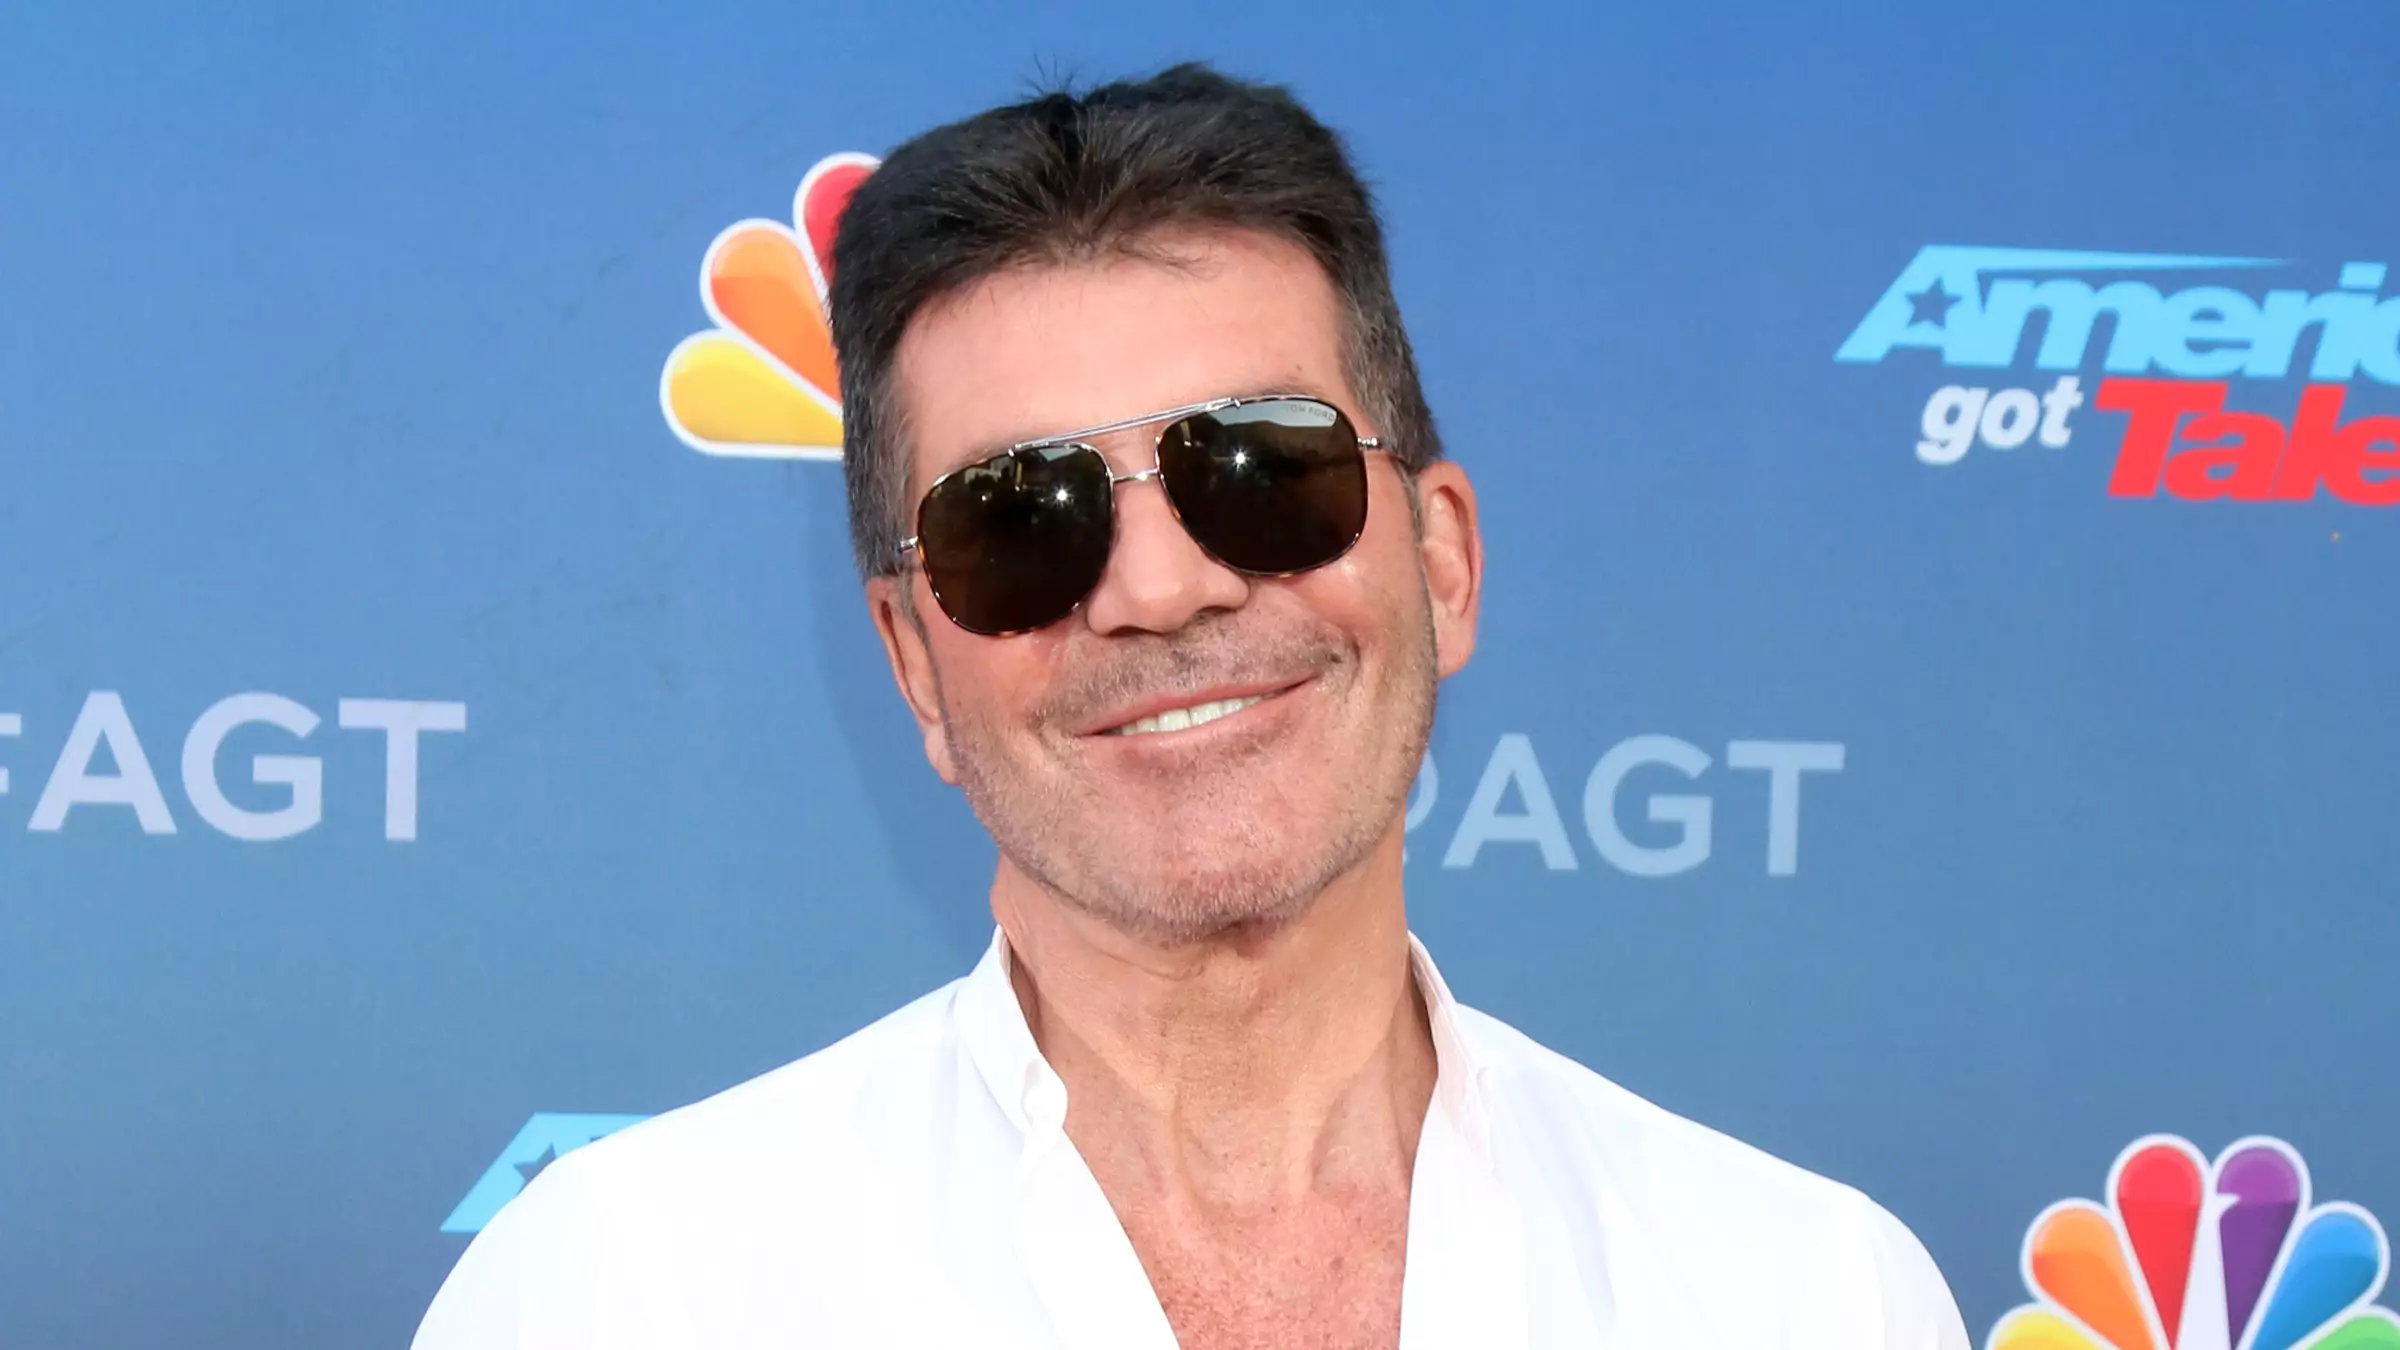 Simon Cowell Hospitalised After Breaking His Back In Bike Accident